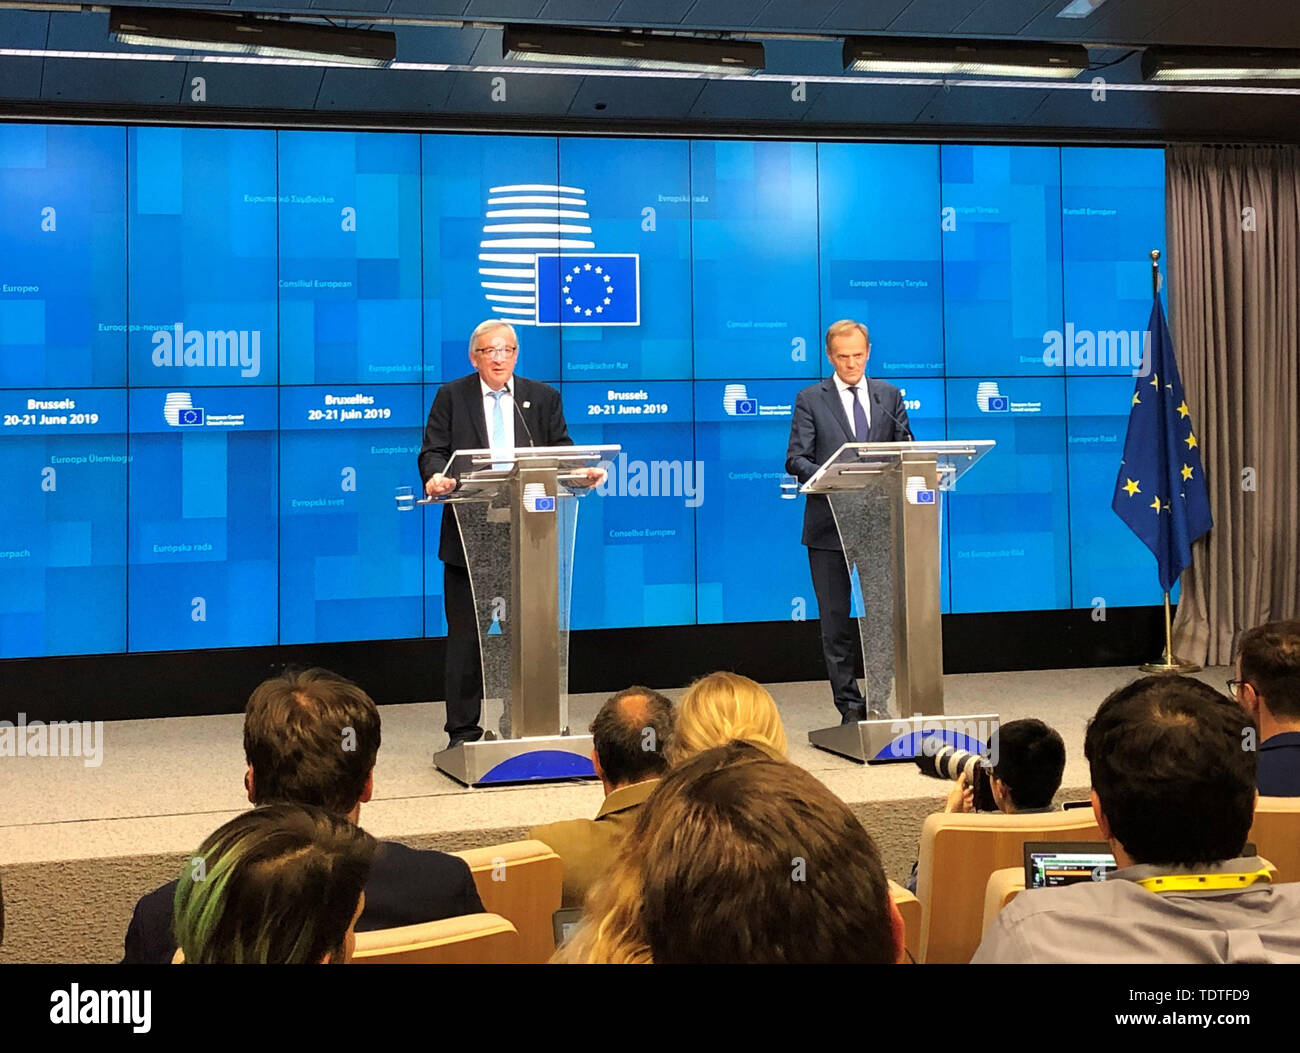 European Commission president Jean-Claude Juncker (left) and European Council president Donald Tusk speak at a press conference aimed at allocating the European Union's top jobs, which will continue at a special summit later this month after no majority could be reached on any candidate. Stock Photo